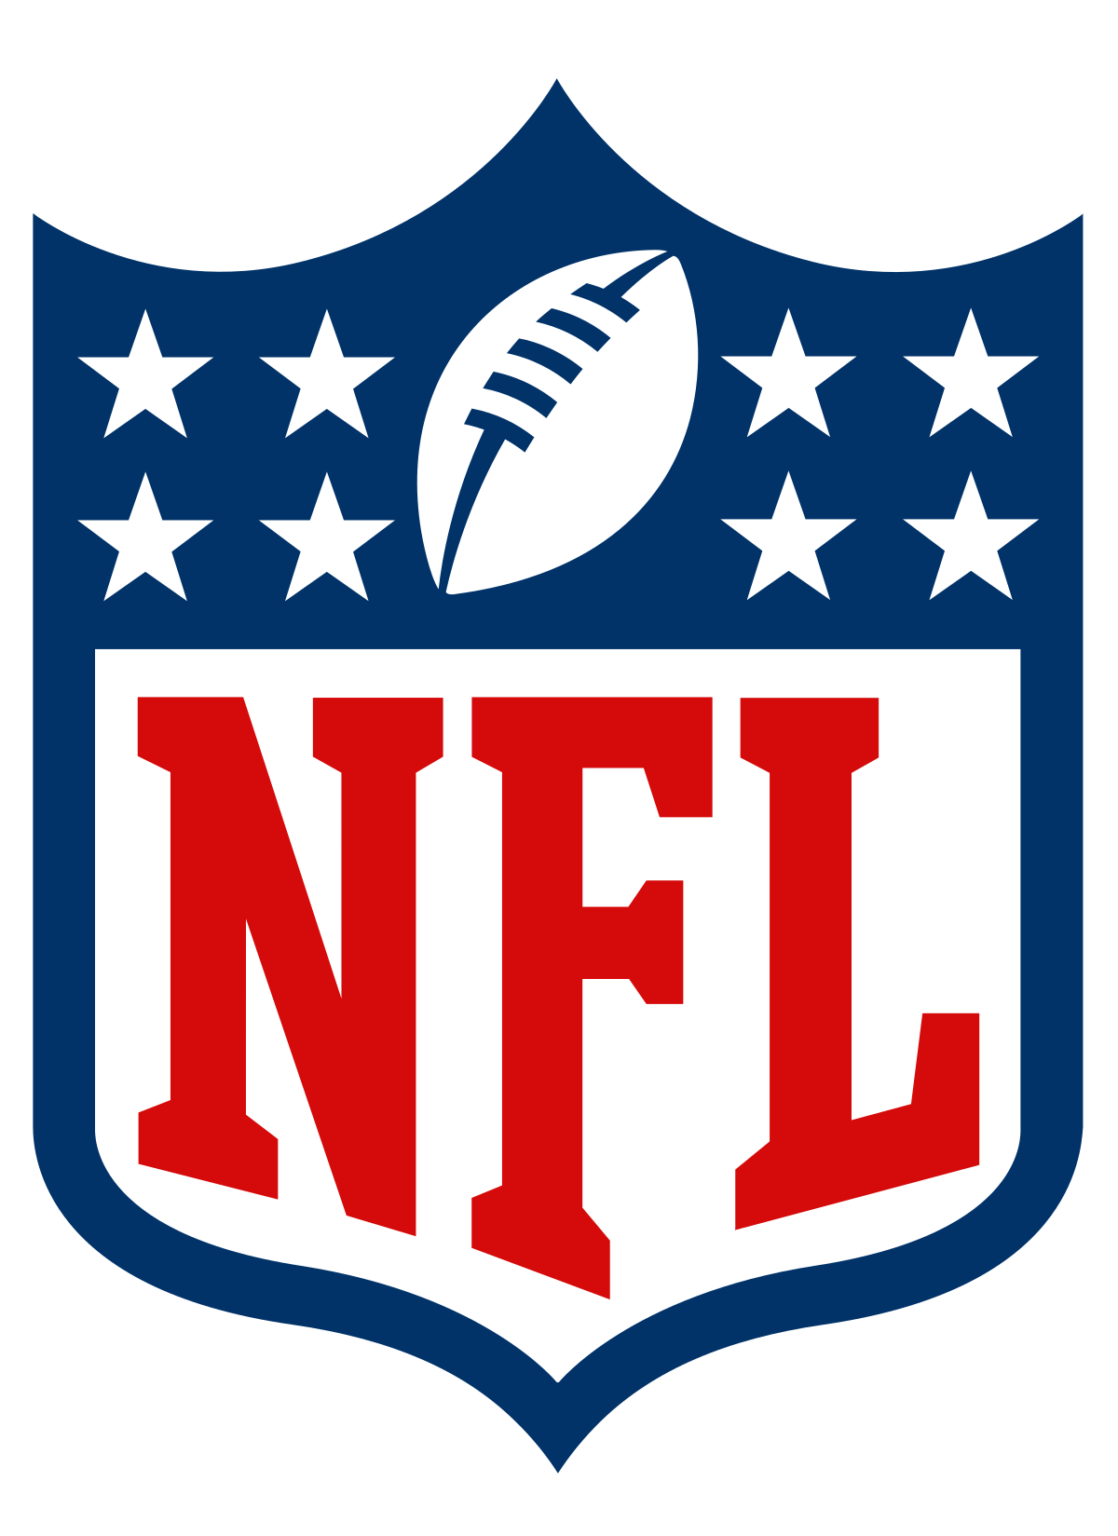 How to watch the kickoff game of the 20232024 NFL season, live online